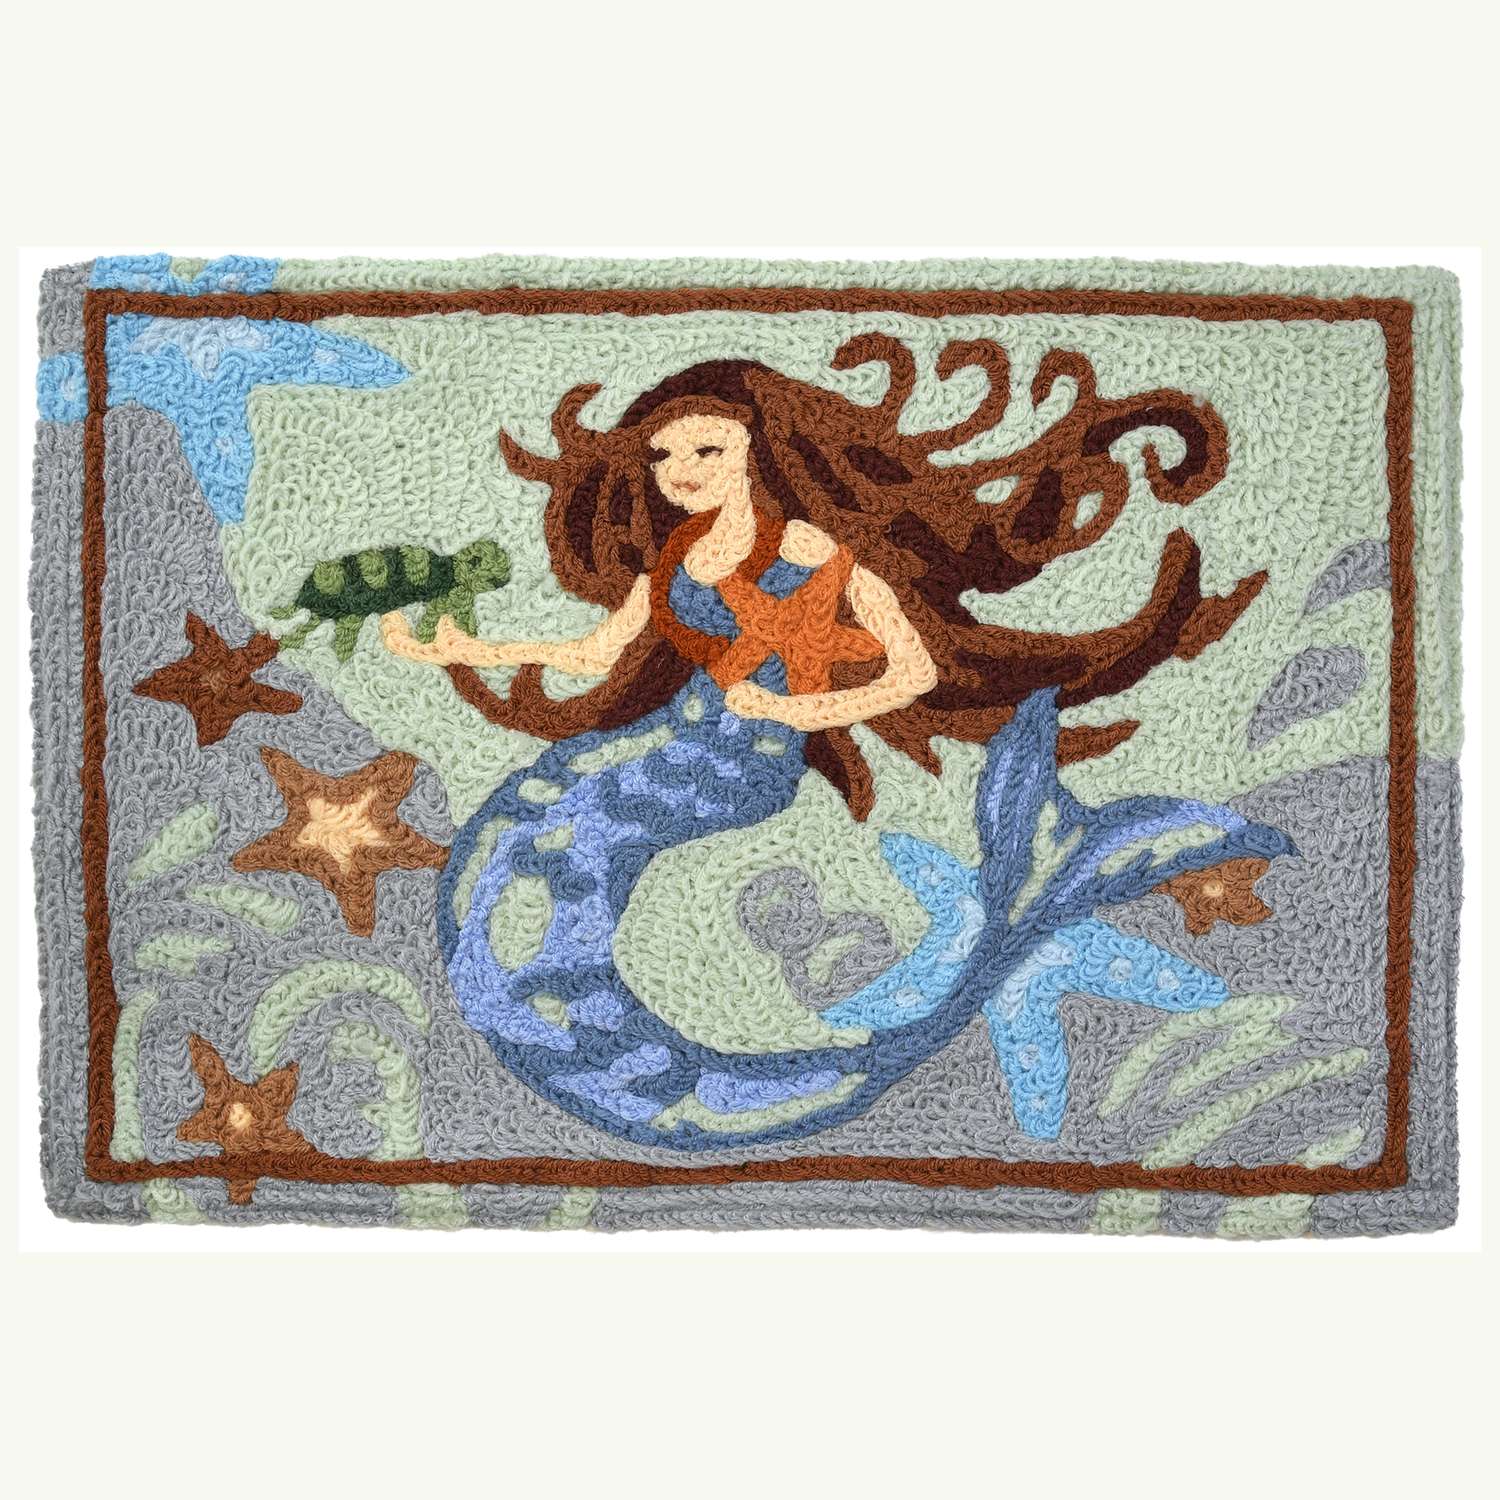 Jellybean 30 in. L X 20 in. W Multi-color Mermaid Under The Sea Accent Rug  Ace Hardware